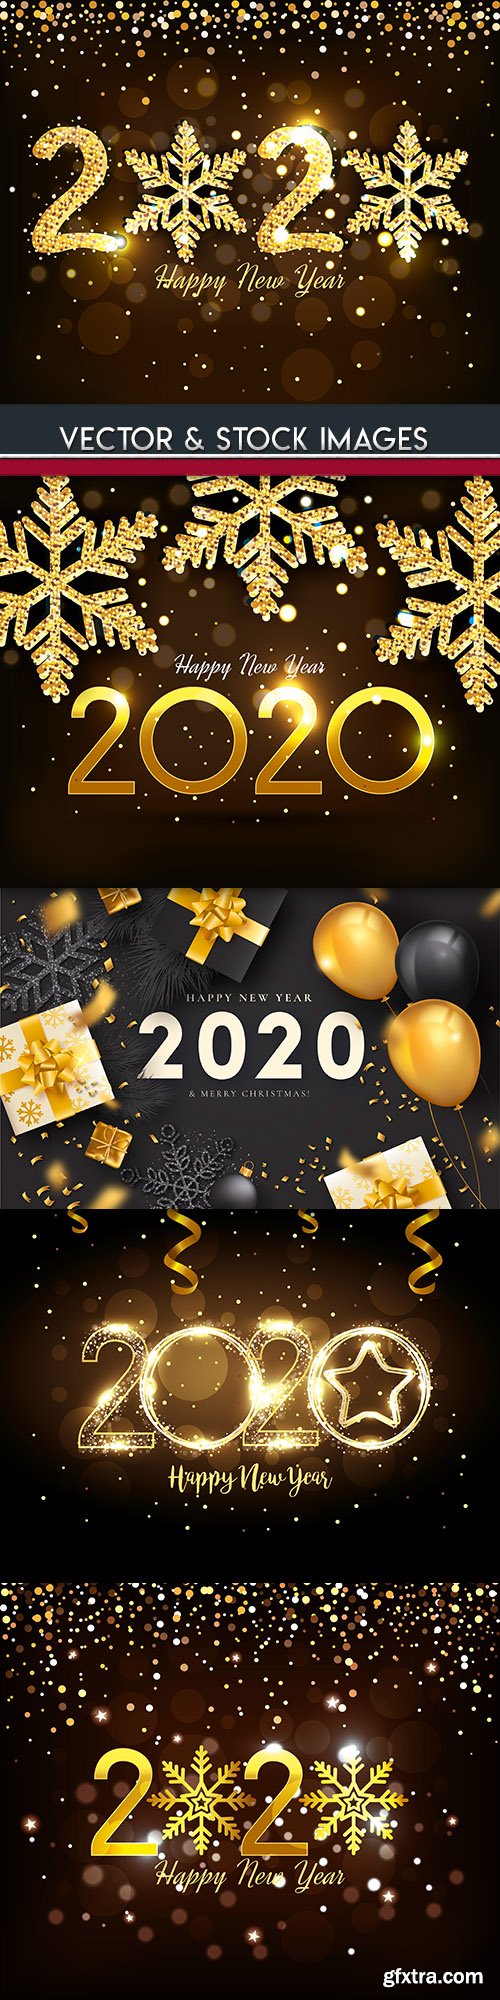 New Year and Christmas decorative 2020 illustration 11